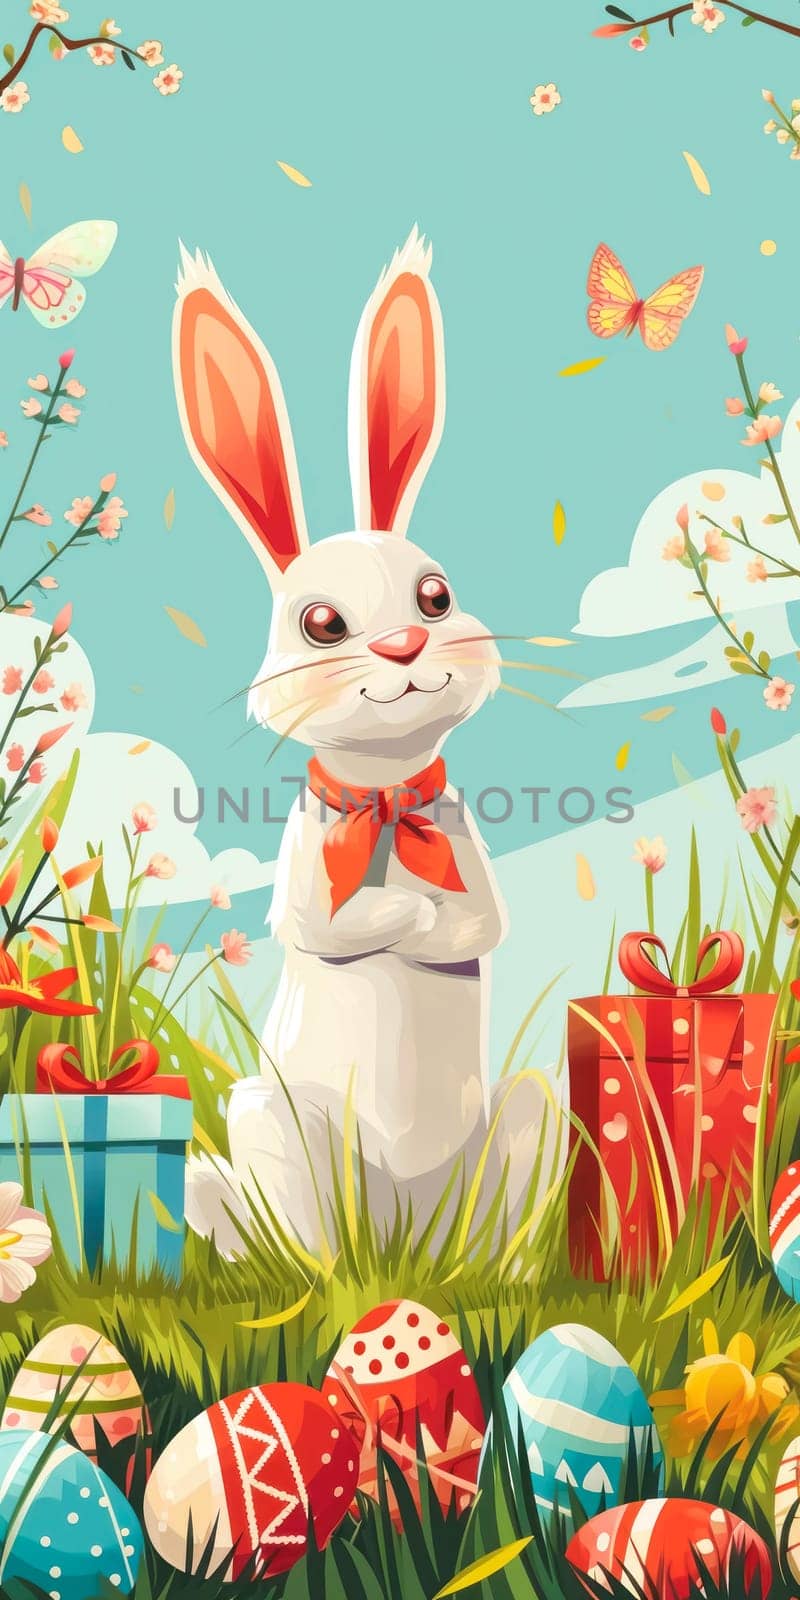 A whimsical Easter illustration featuring a white bunny with a bright orange bow, standing in a blooming spring field with gifts and a variety of patterned Easter eggs